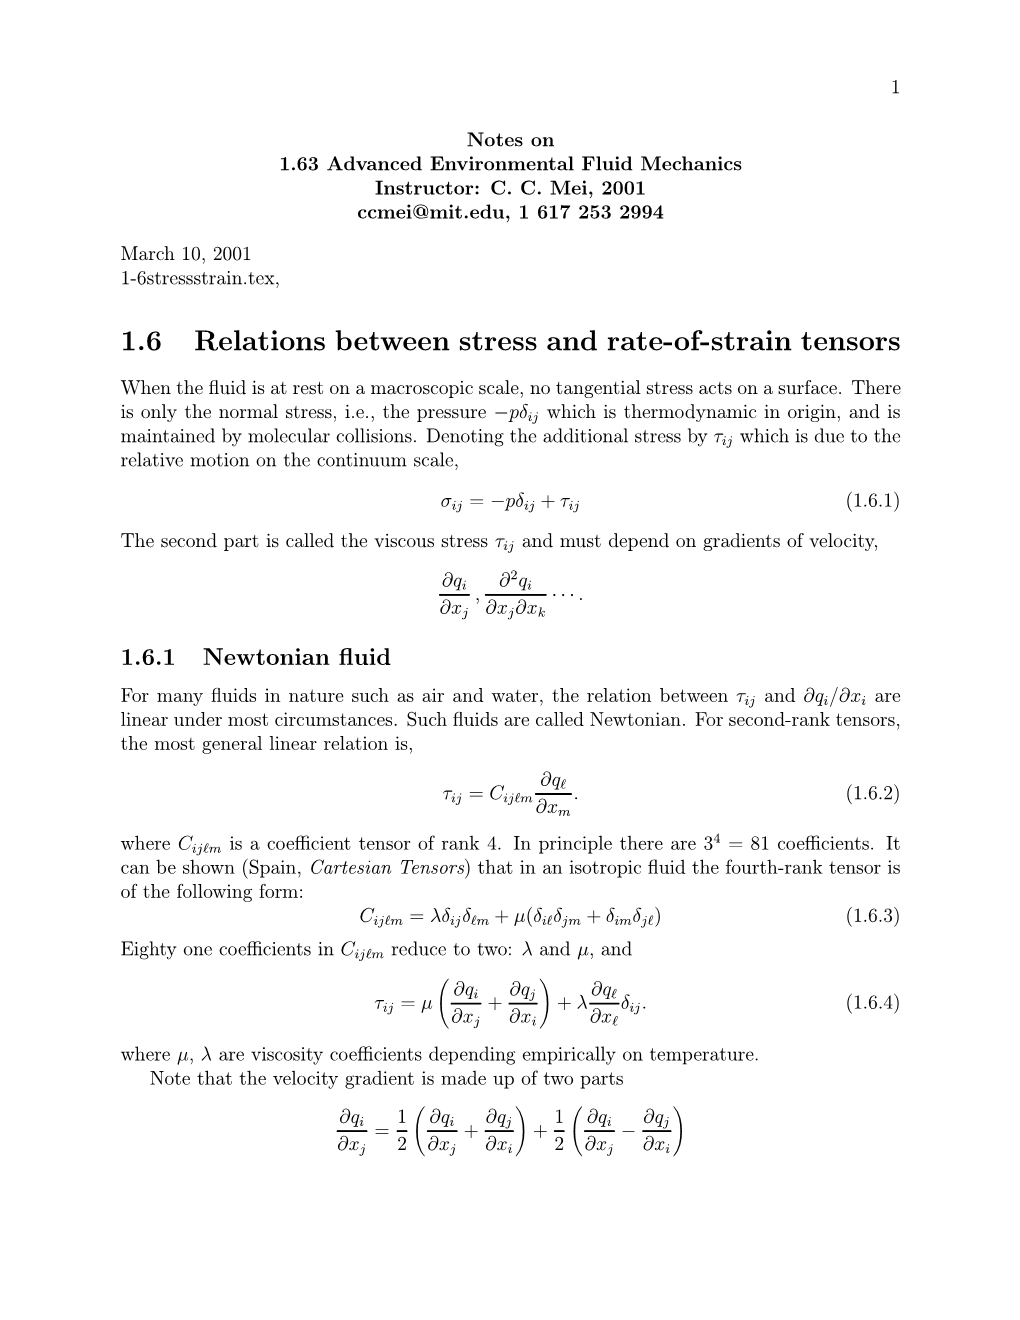 1-6 Relations Between Stress and Rate-Of-Strain Tensors